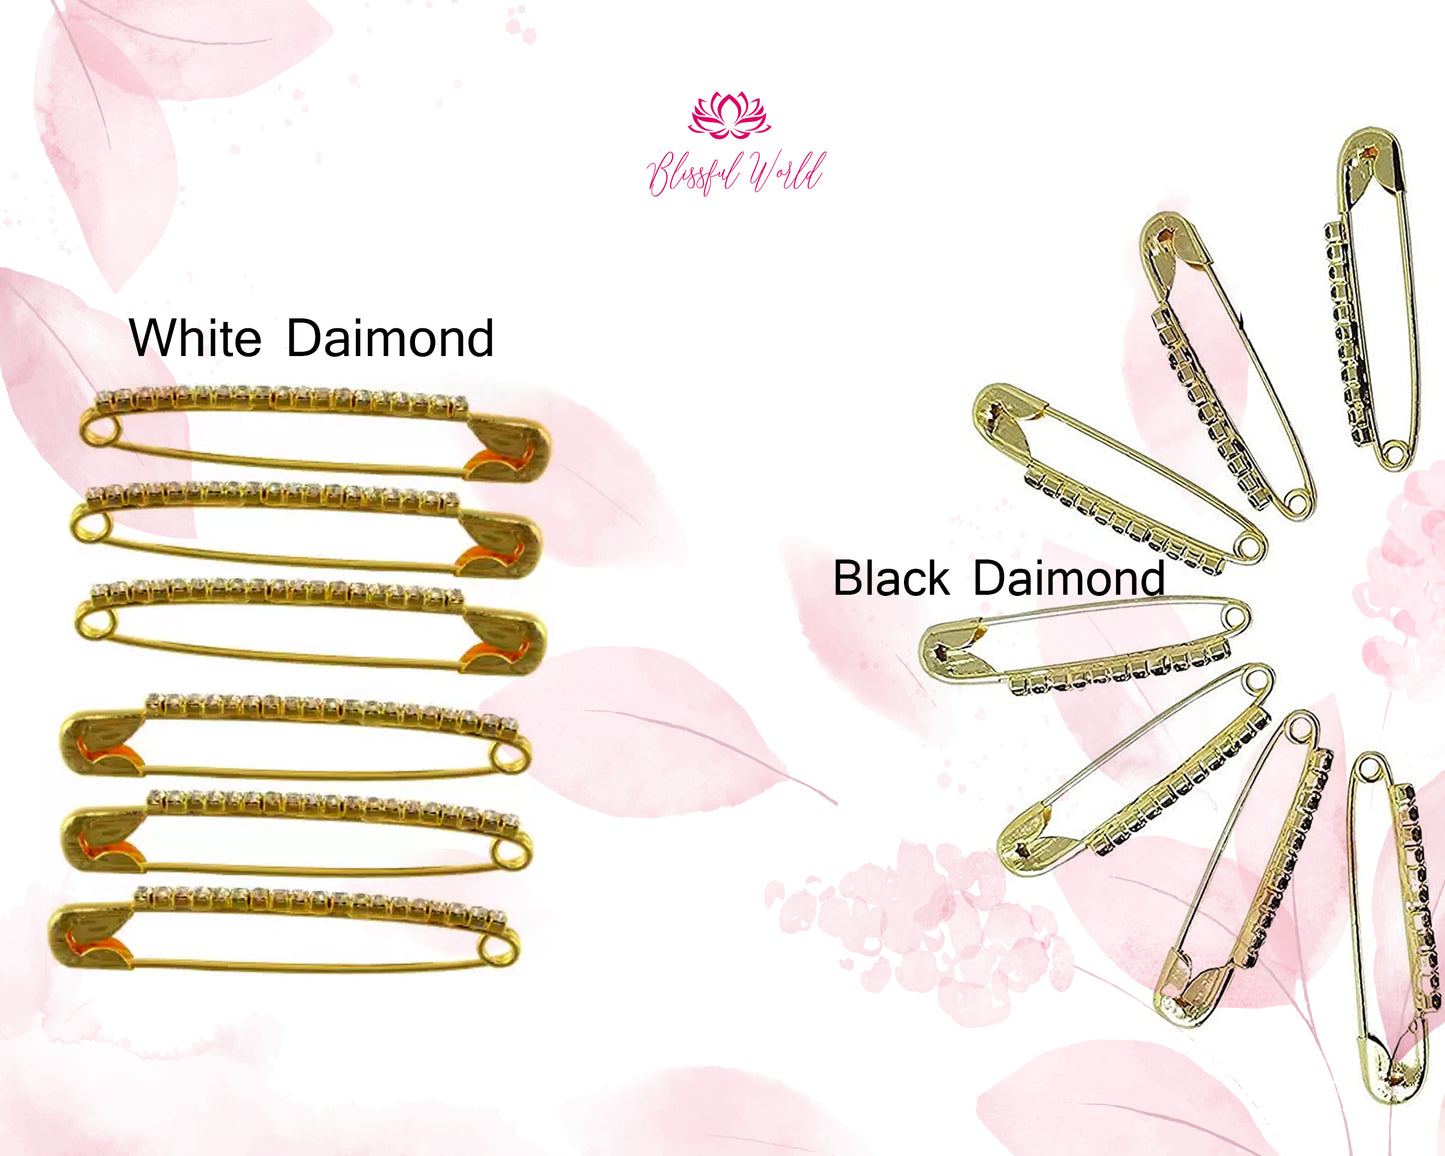 Decorative Diamond Pins For Brides Wedding Bouquet Memorial Photo Attachment Brooch Pins Safety Pins Color Full Pins Sash Pins